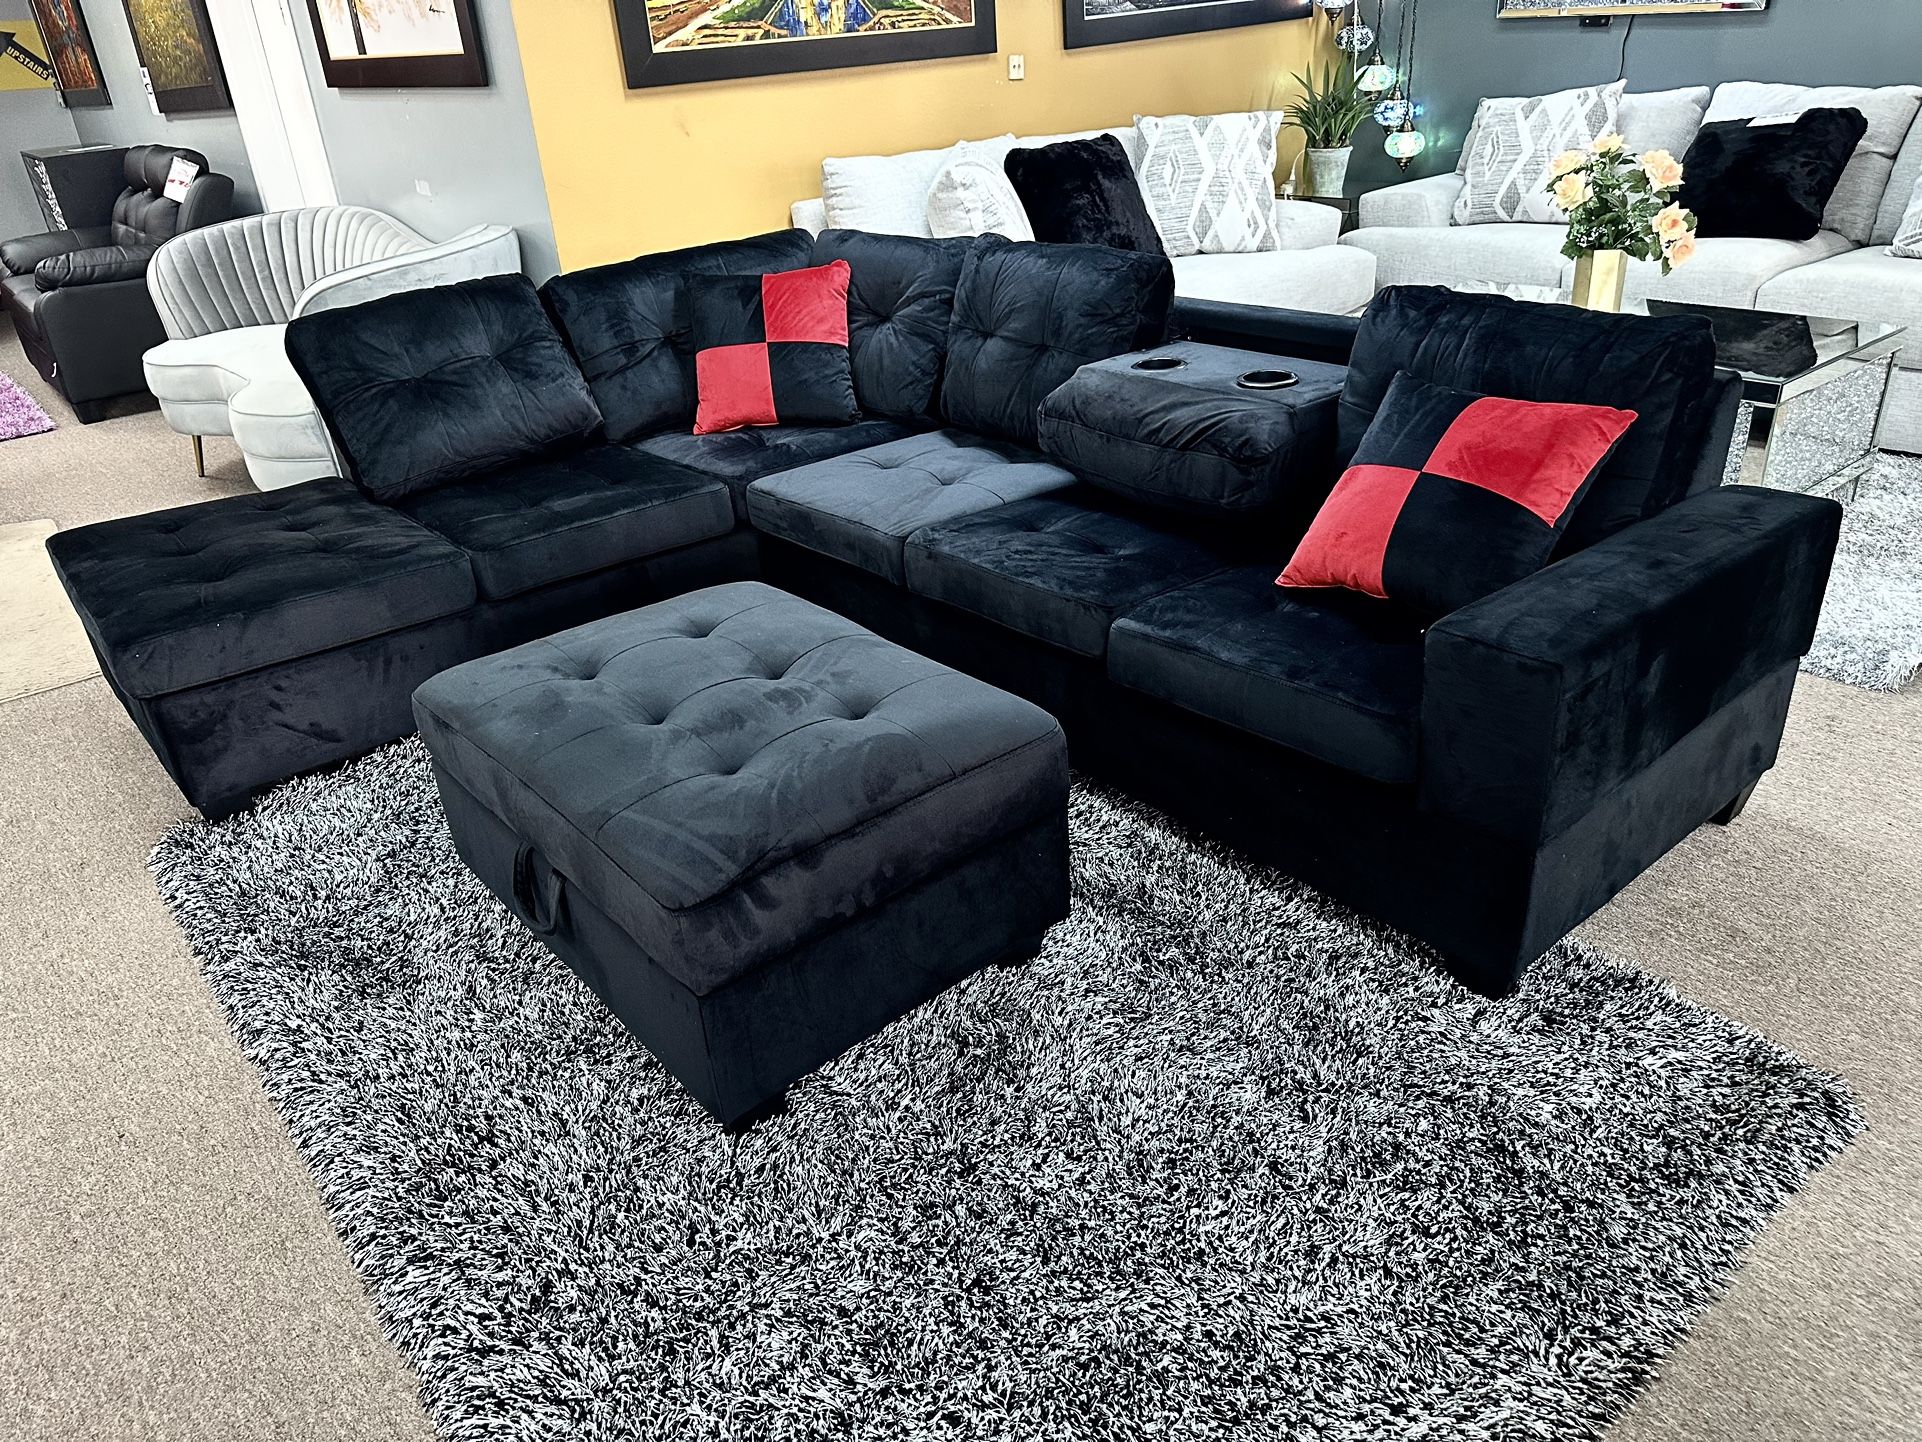 Sectional With Cup holders And Ottoman $649 Ask For ROXANNA 